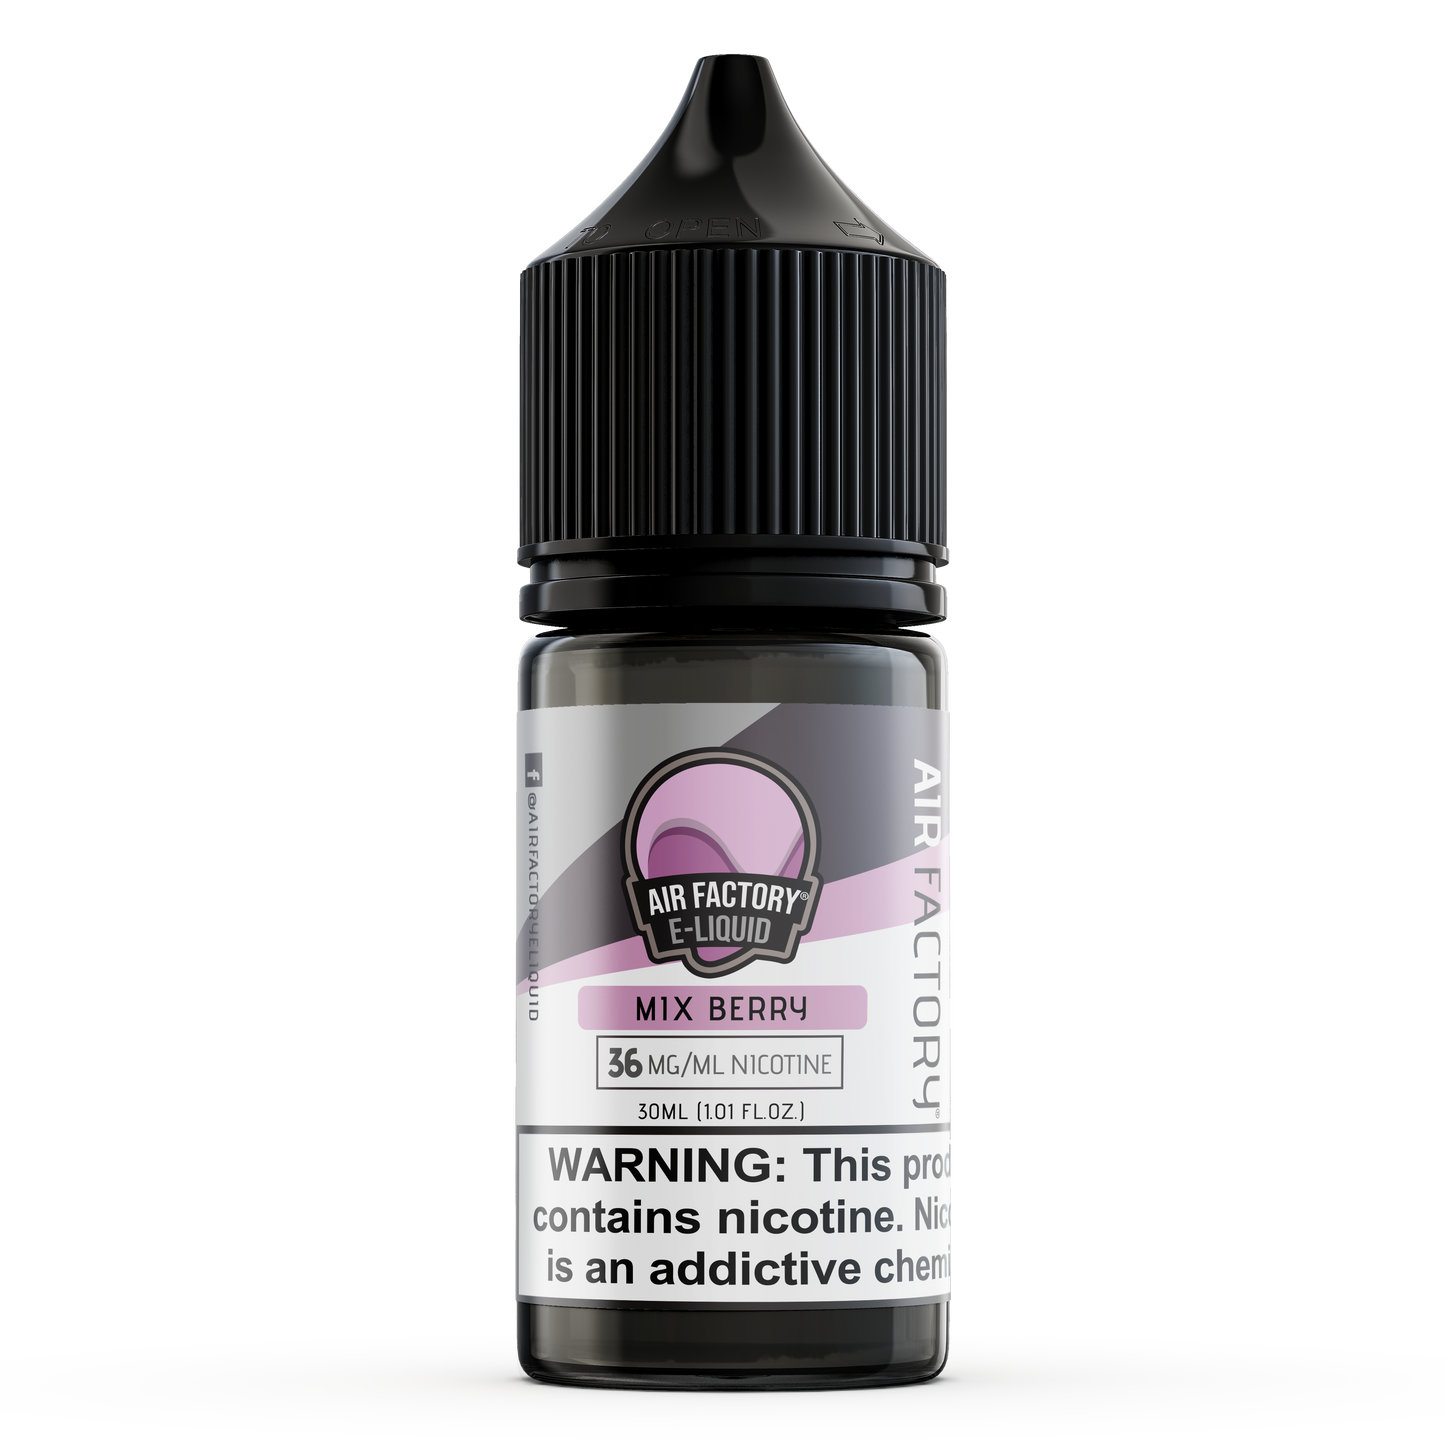 Mix Berry by Air Factory Salt eJuice 30mL bottle